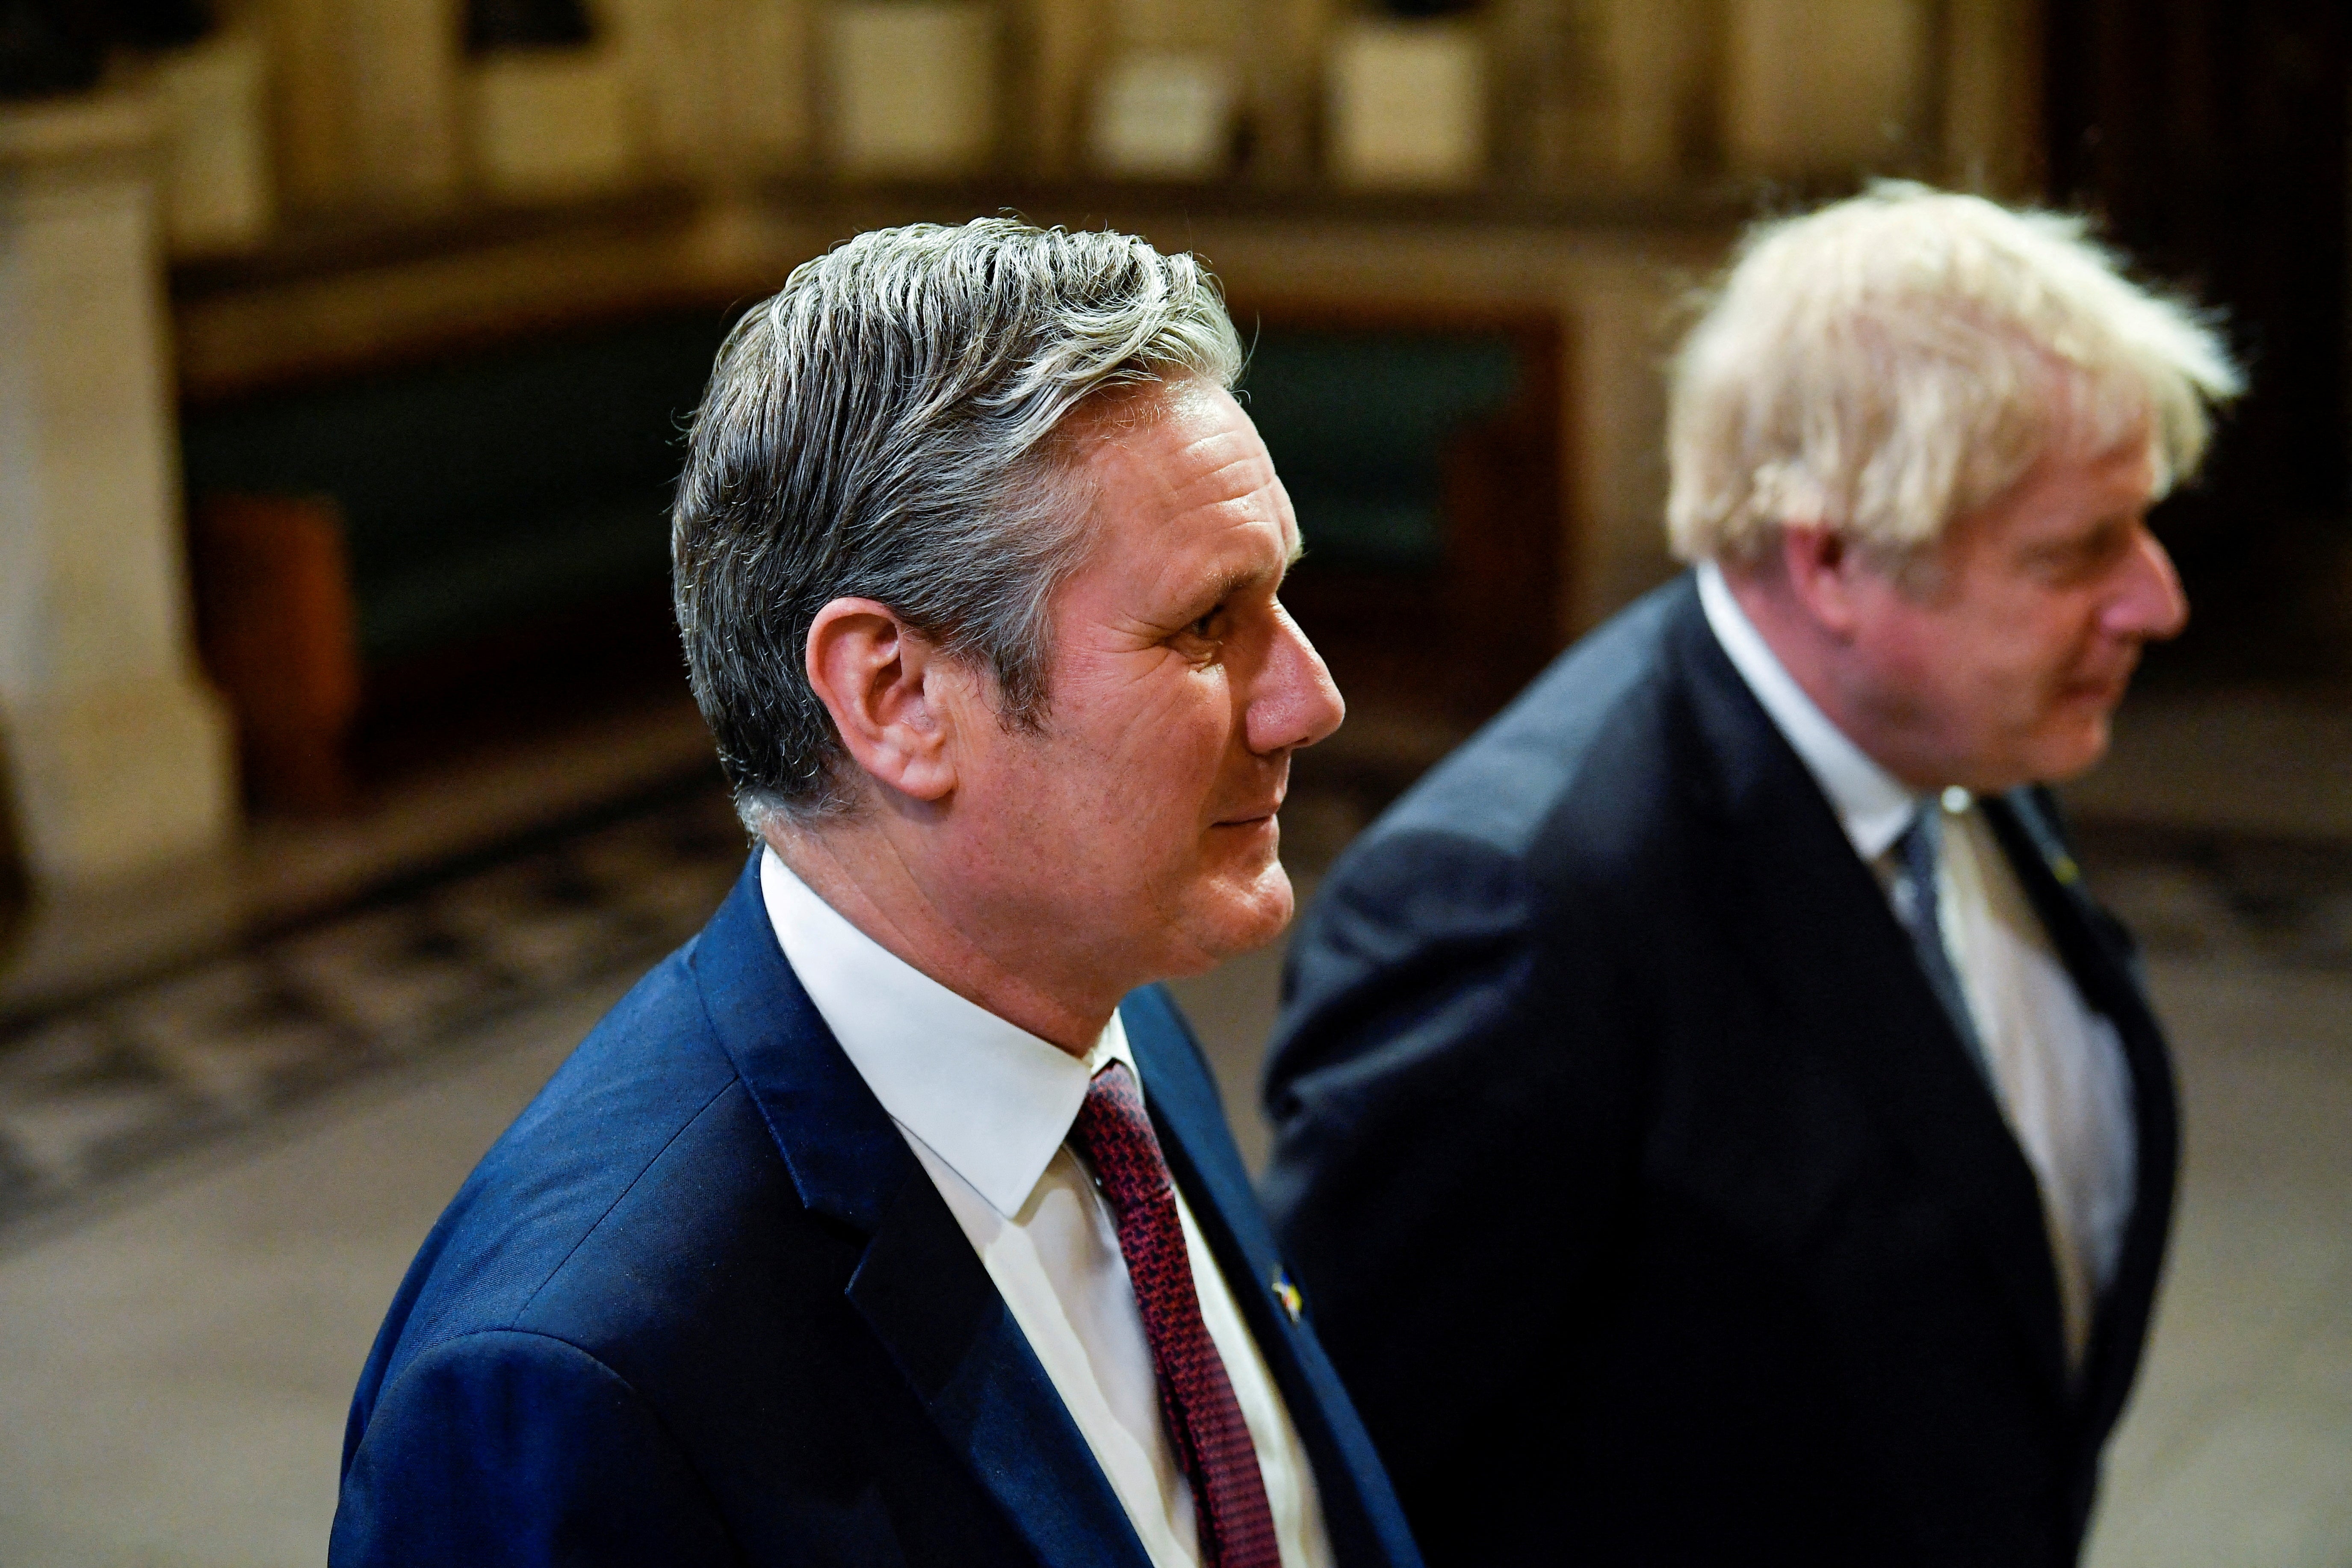 The Labour leader pretended to laugh in an easygoing way while he and Boris Johnson walked side by side to the House of Lords